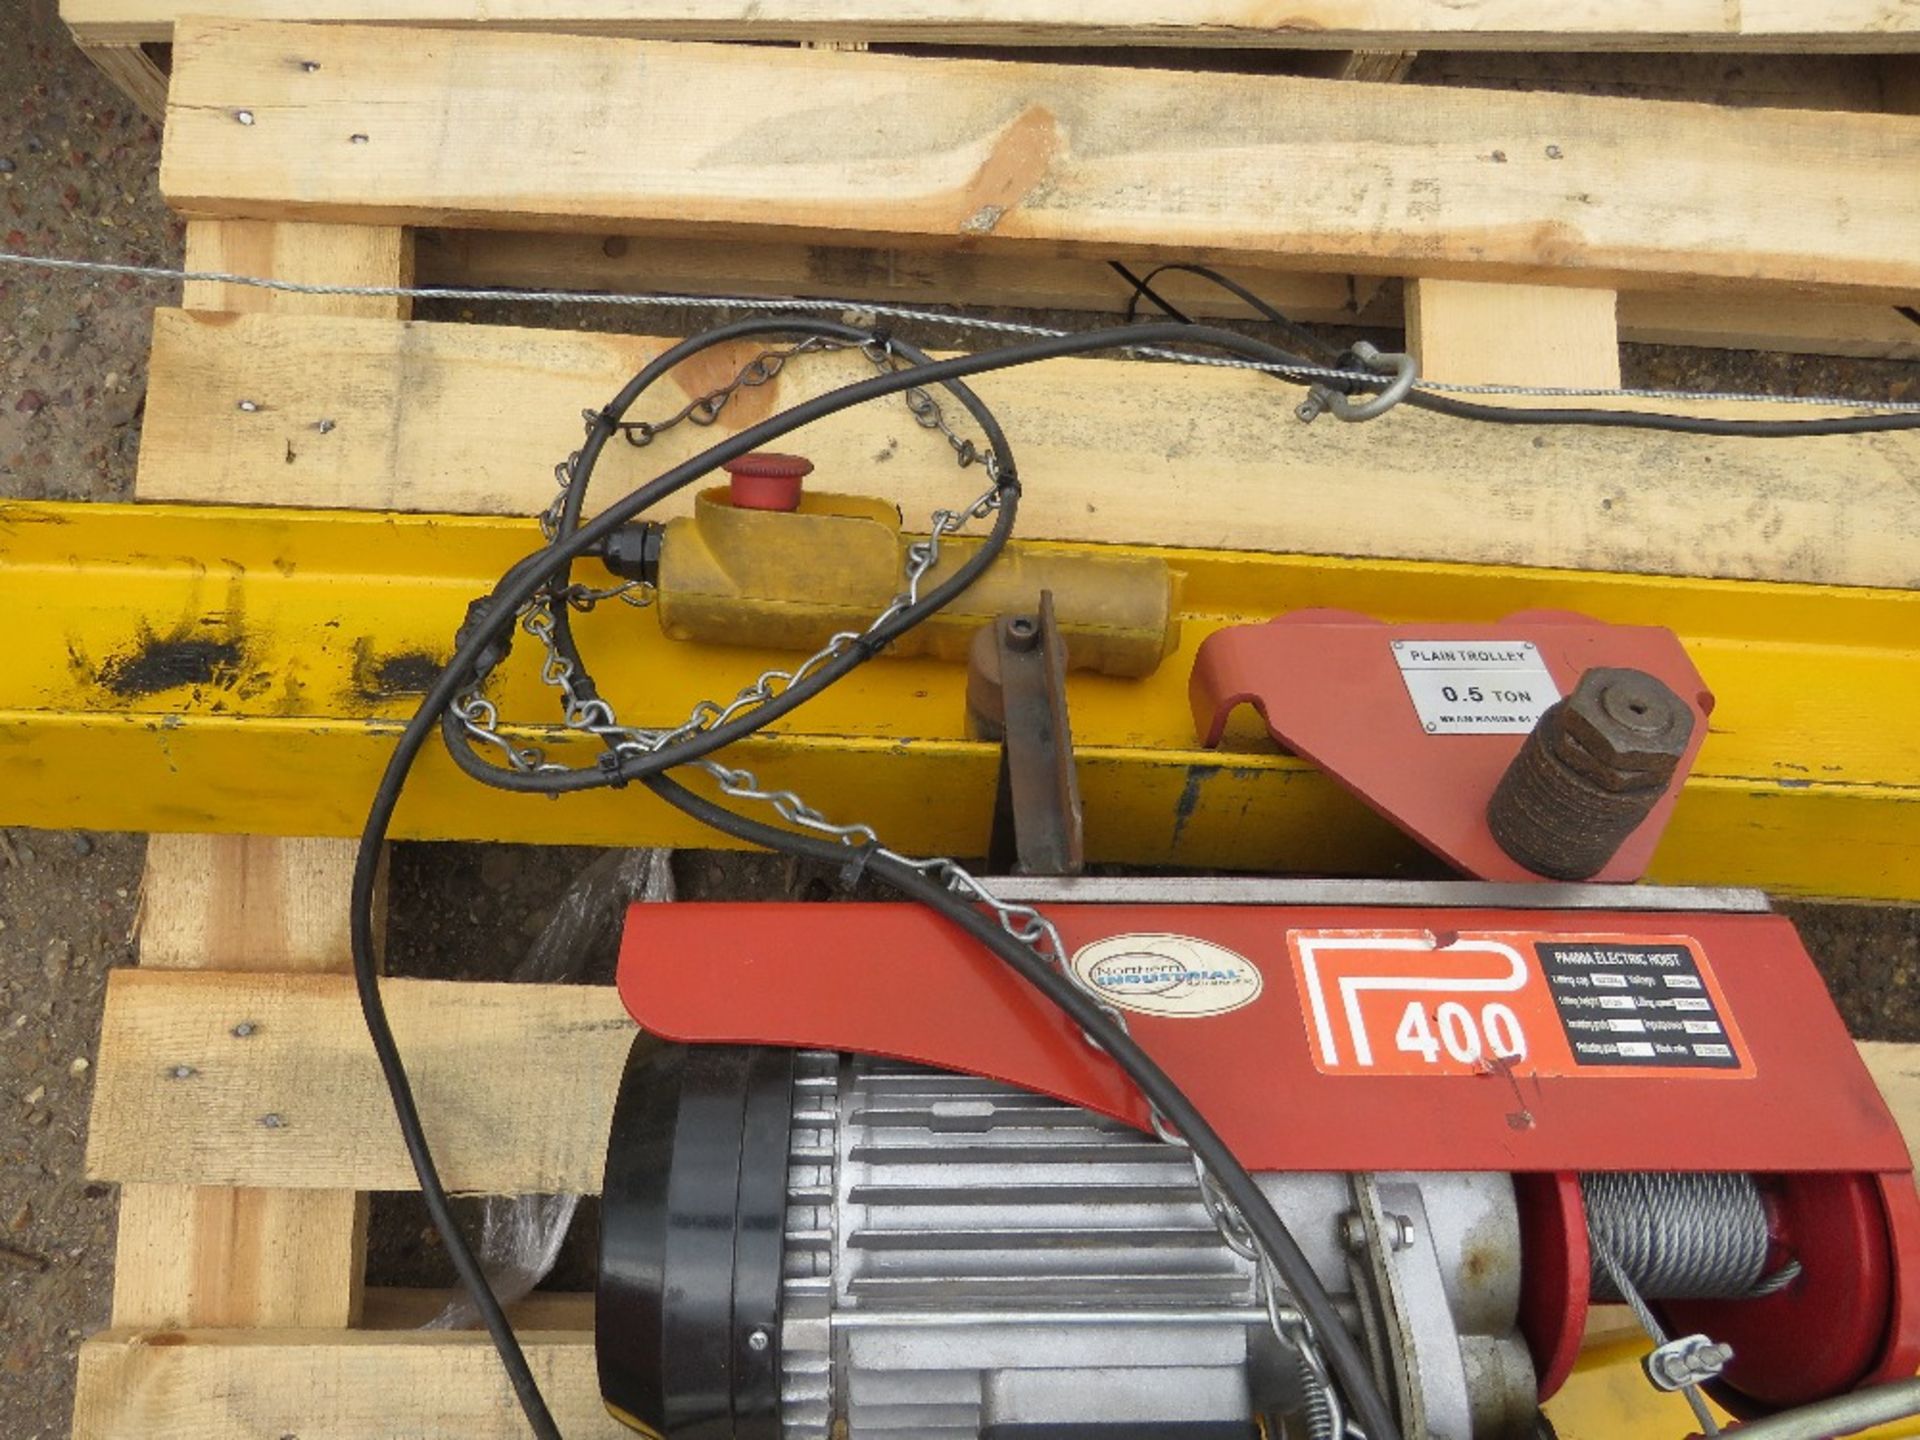 JIB CRANE UNIT WITH SMALL SPREADER BAR, MAIN POST, BEAM AND CONNECTING PIN. 400KG RATED HOIST, 240 V - Image 7 of 7